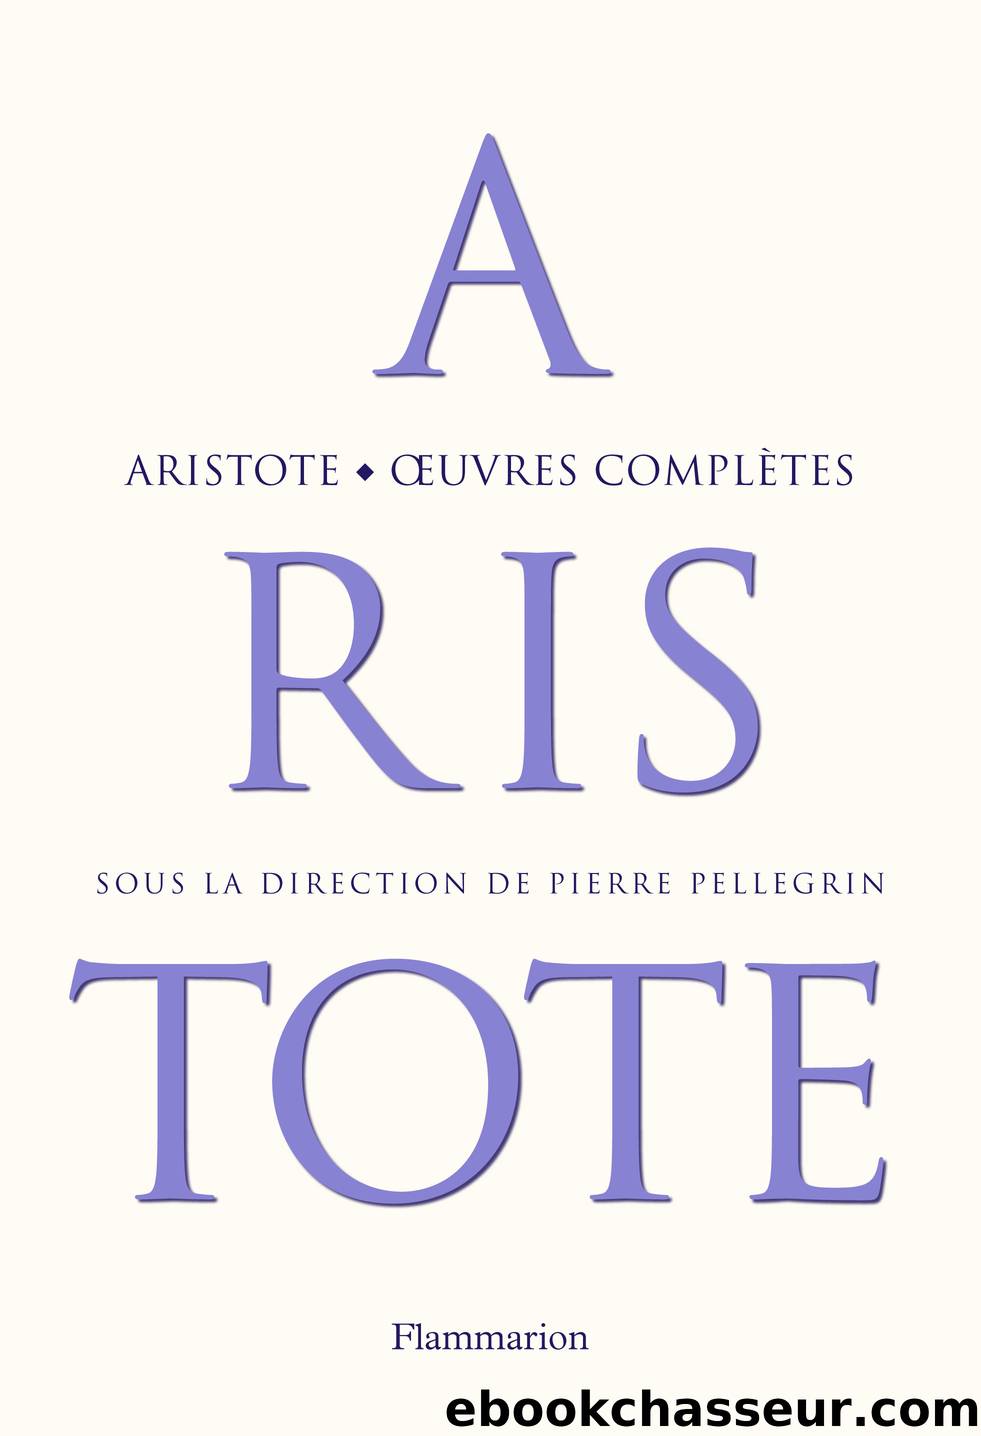 Oeuvres complètes by Aristote